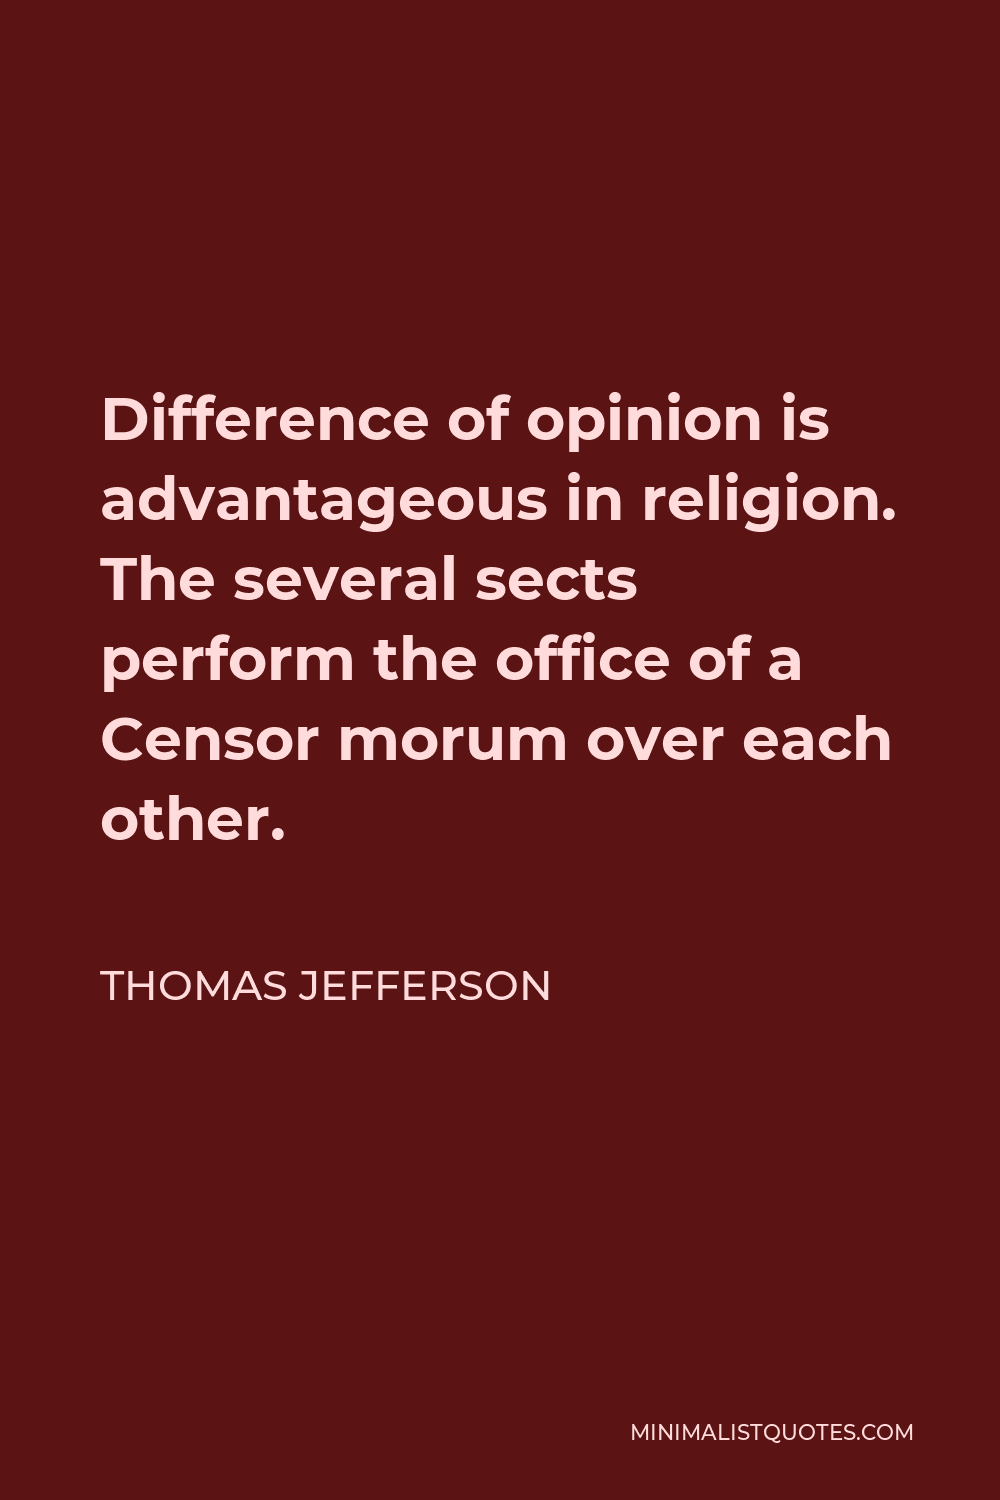 Thomas Jefferson Quote - Difference of opinion is advantageous in religion. The several sects perform the office of a Censor morum over each other.